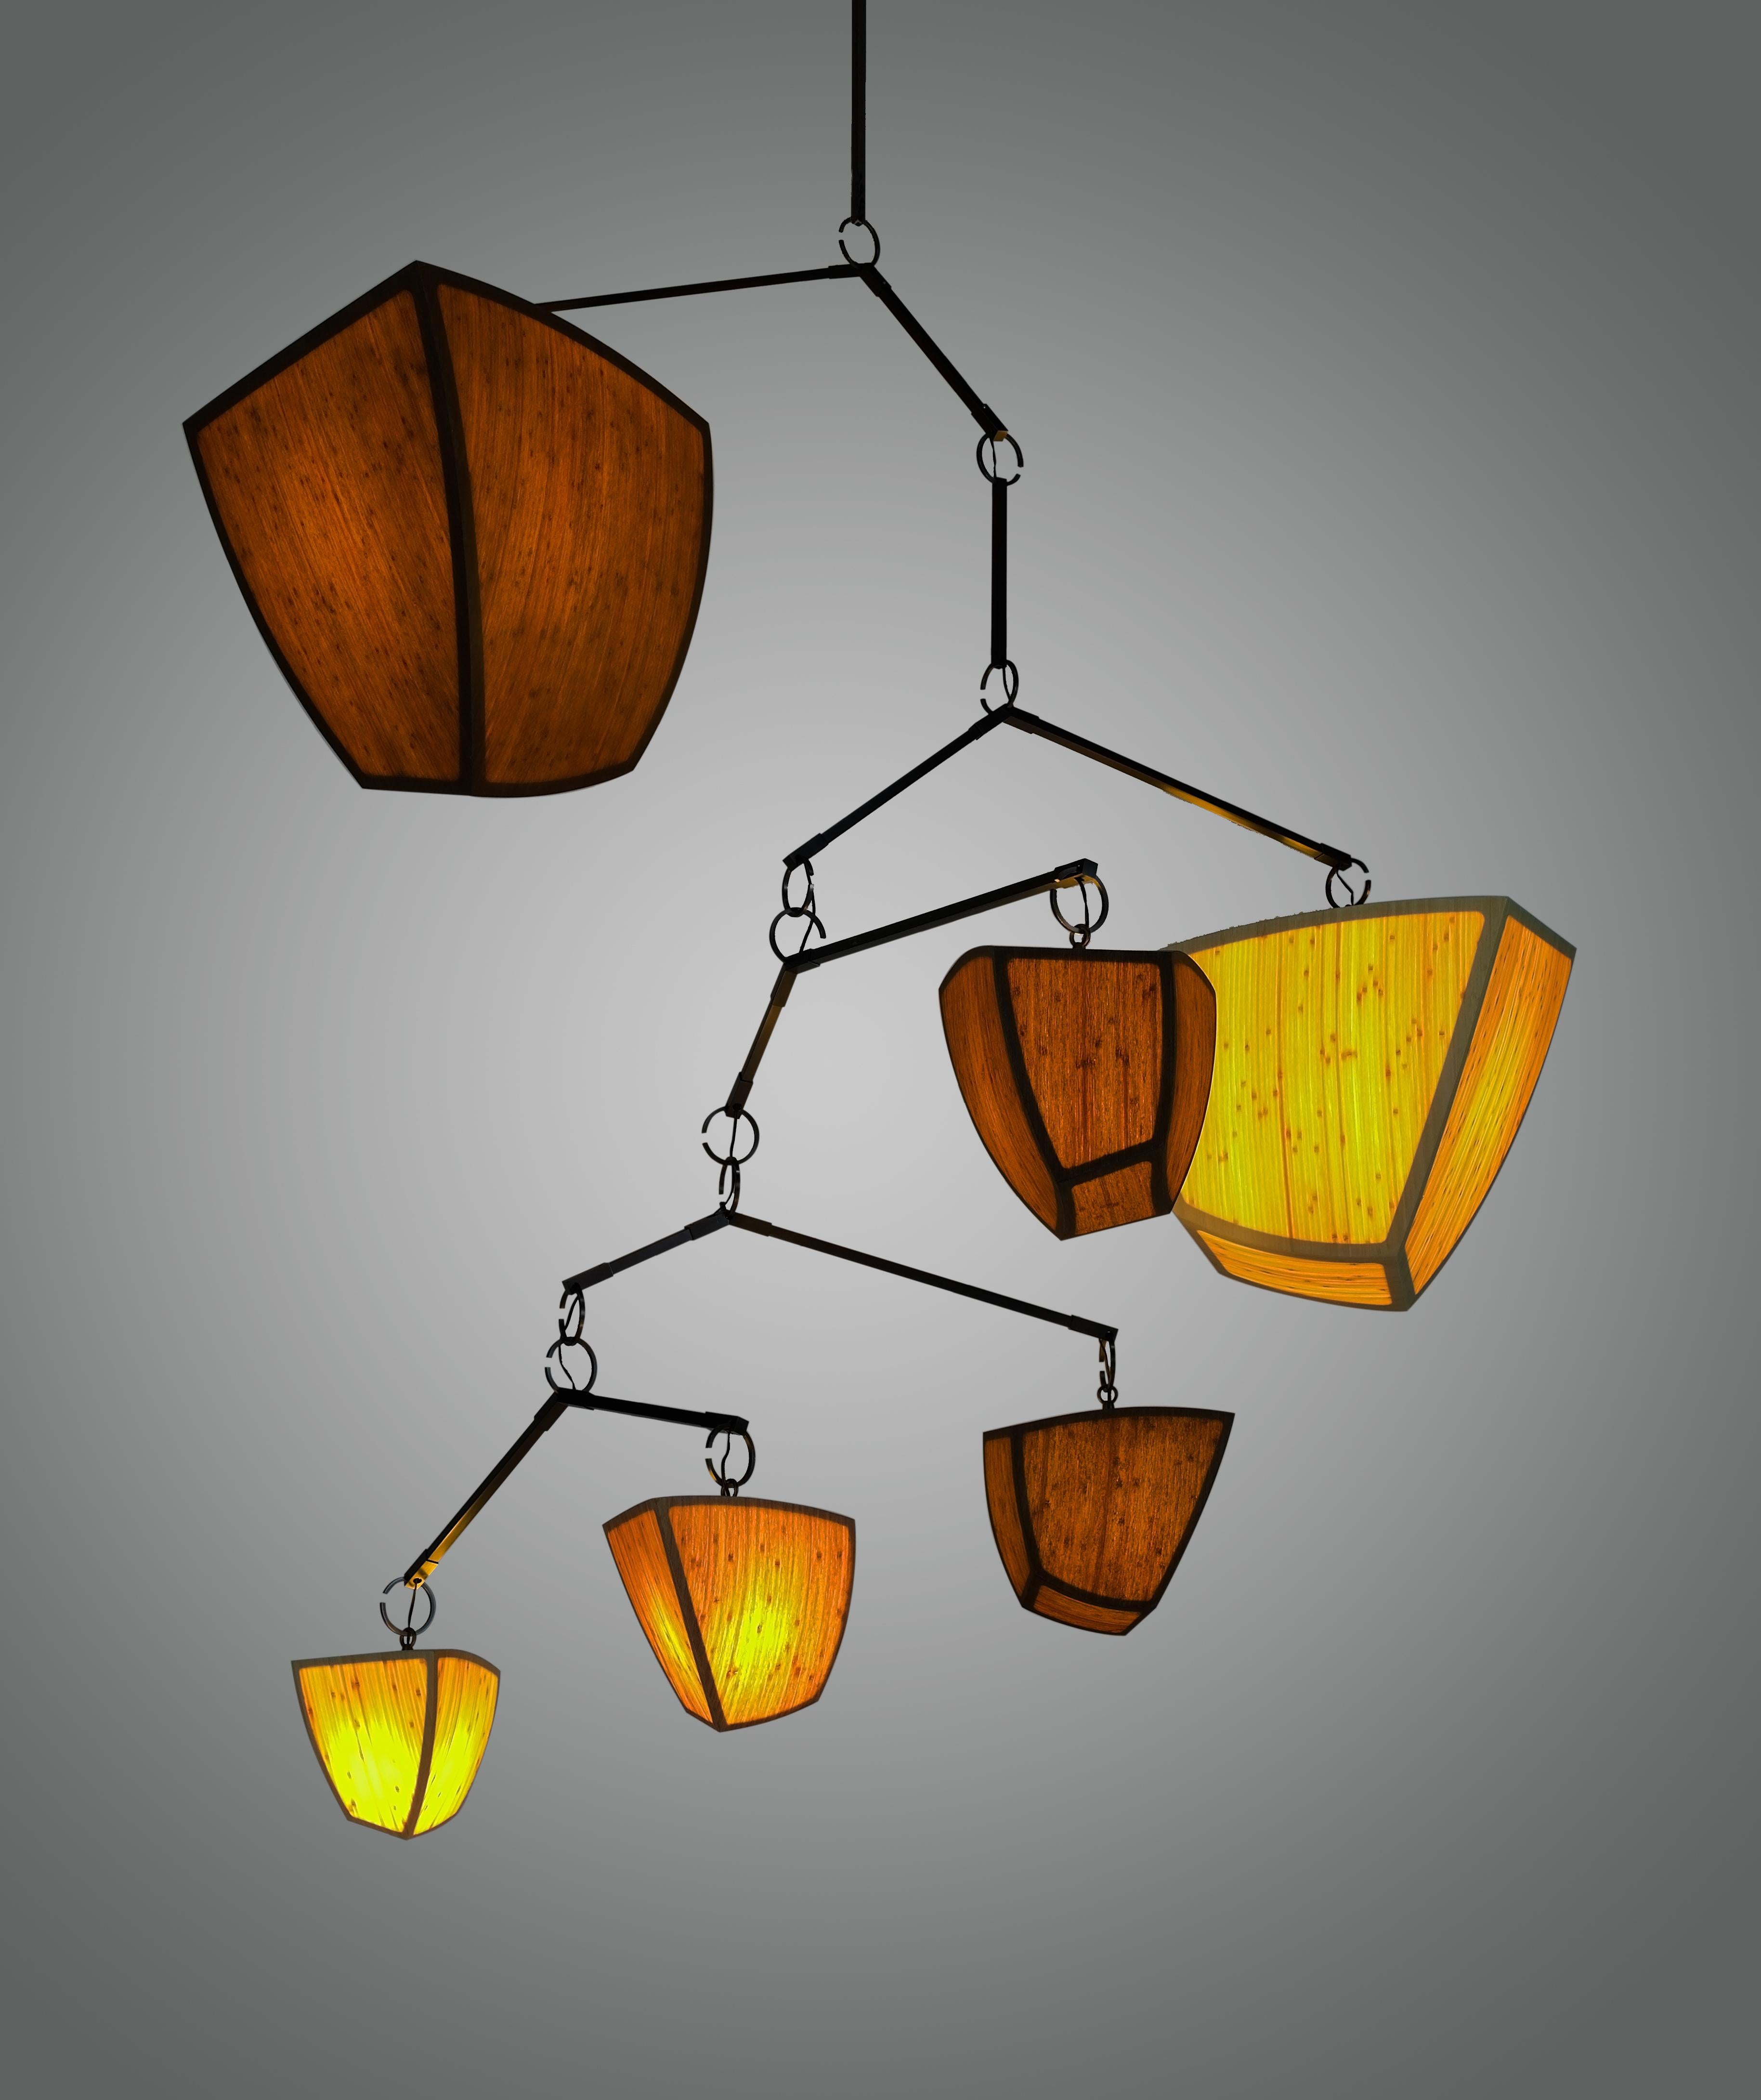 Ivy 6: ABCDFG is a mobile chandelier with 6 glowing bamboo polyhedrons, arranged in size order. The Ivy Series is a vertically oriented variation which mimics the shape of Ivy vines.

Our unique handcrafted mobile chandelier can be configured into